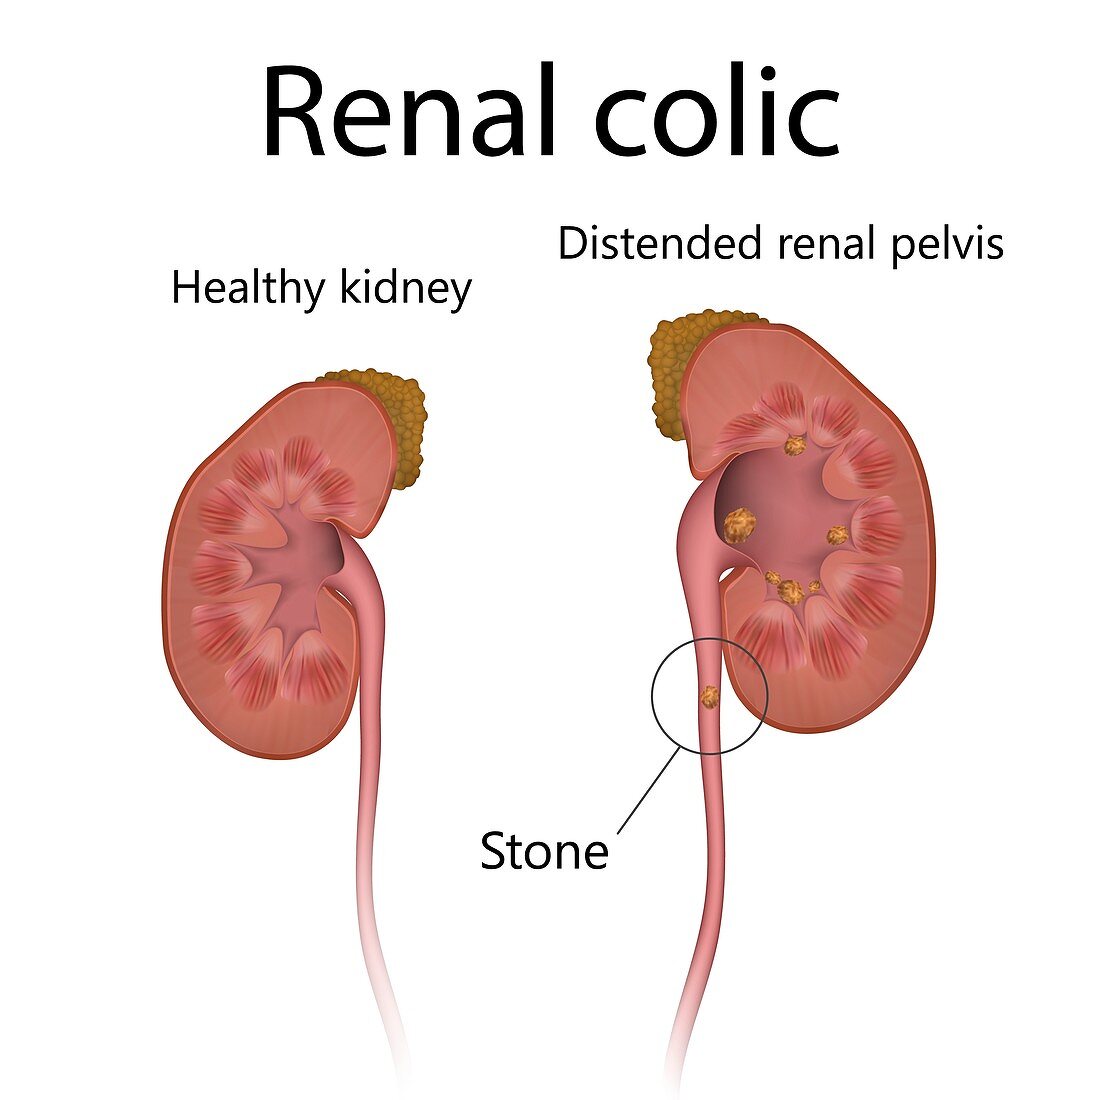 Healthy kidney and kidney with renal colic, illustration